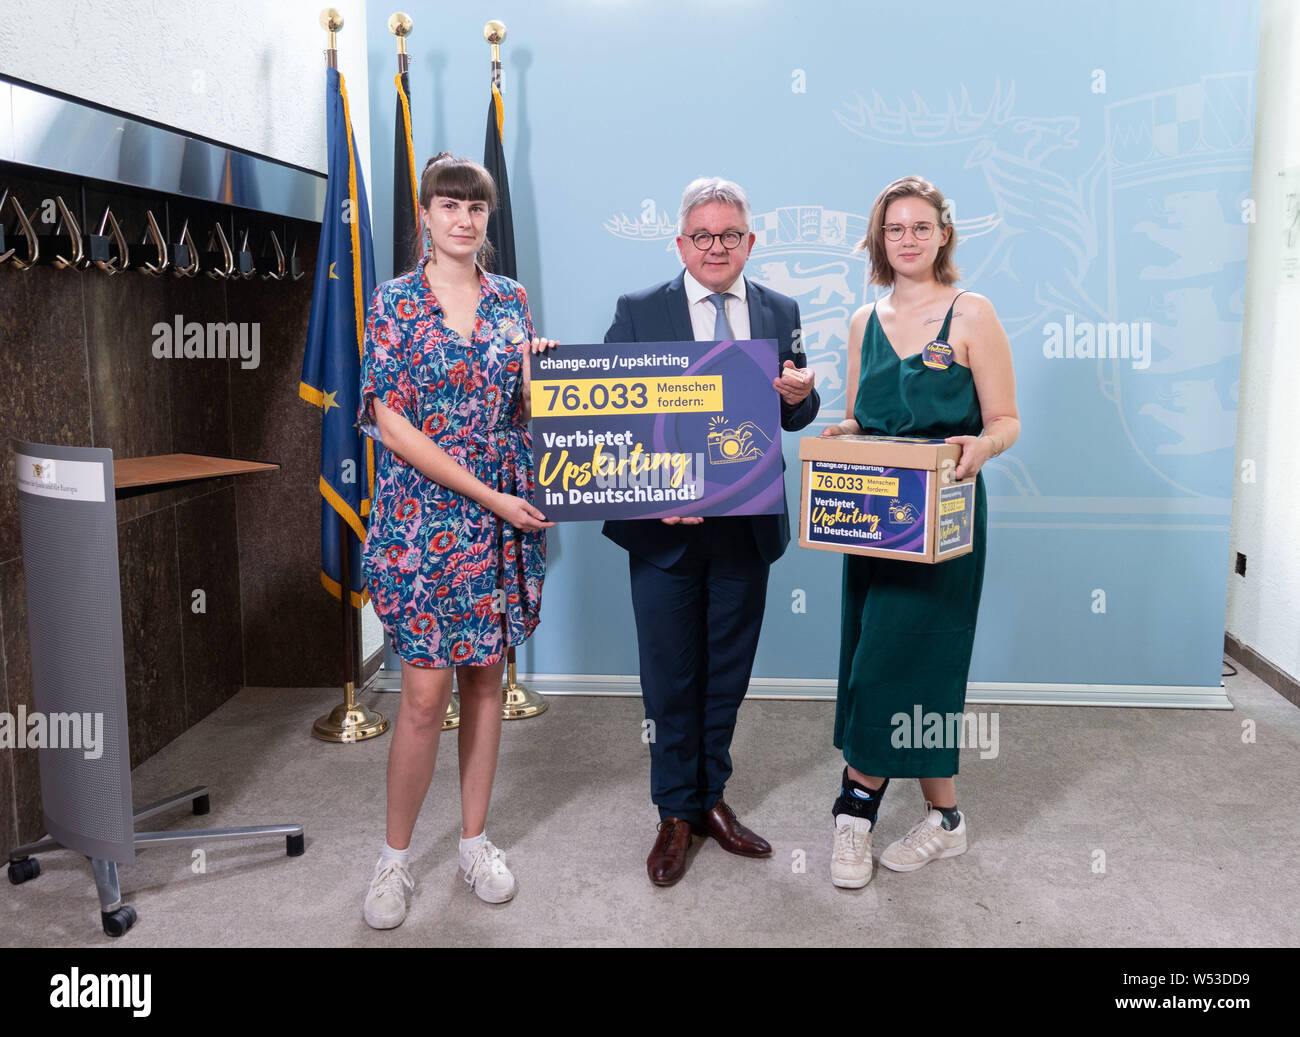 Stuttgart, Germany. 26th July, 2019. Hanna Seidel (l) and Ida Marie Sassenberg (r), initiators of the petition 'Prohibits #Upskirting in Germany', meet Guido Wolf (CDU), Minister of Justice of Baden-Württemberg, during a press conference. A few months ago they launched a petition against voyeuristic photography and filming under skirts and dresses. Credit: Linda Vogt/dpa/Alamy Live News Stock Photo